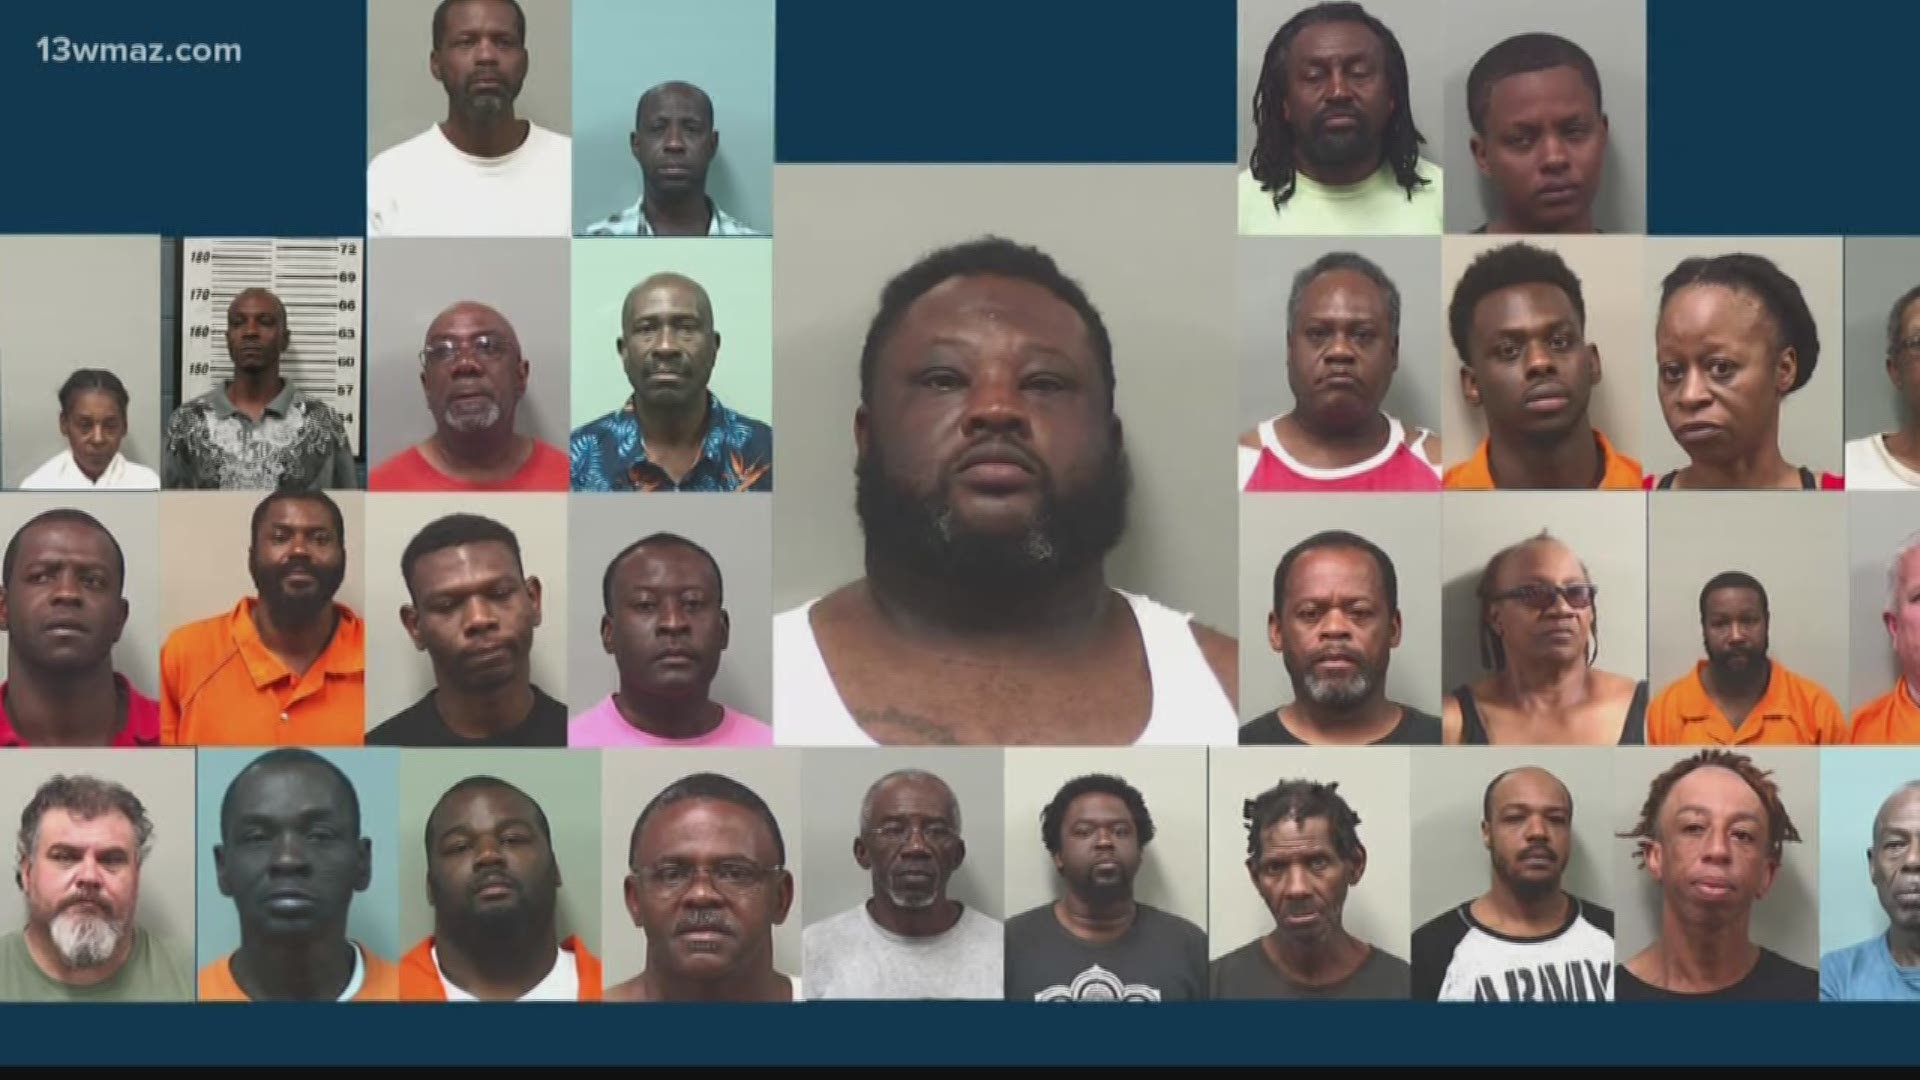 Nearly three dozen drug suspects ranging in age from 23 to 70 were arrested after months of investigation in Bleckley County. The sheriff's office says they may not be finished.